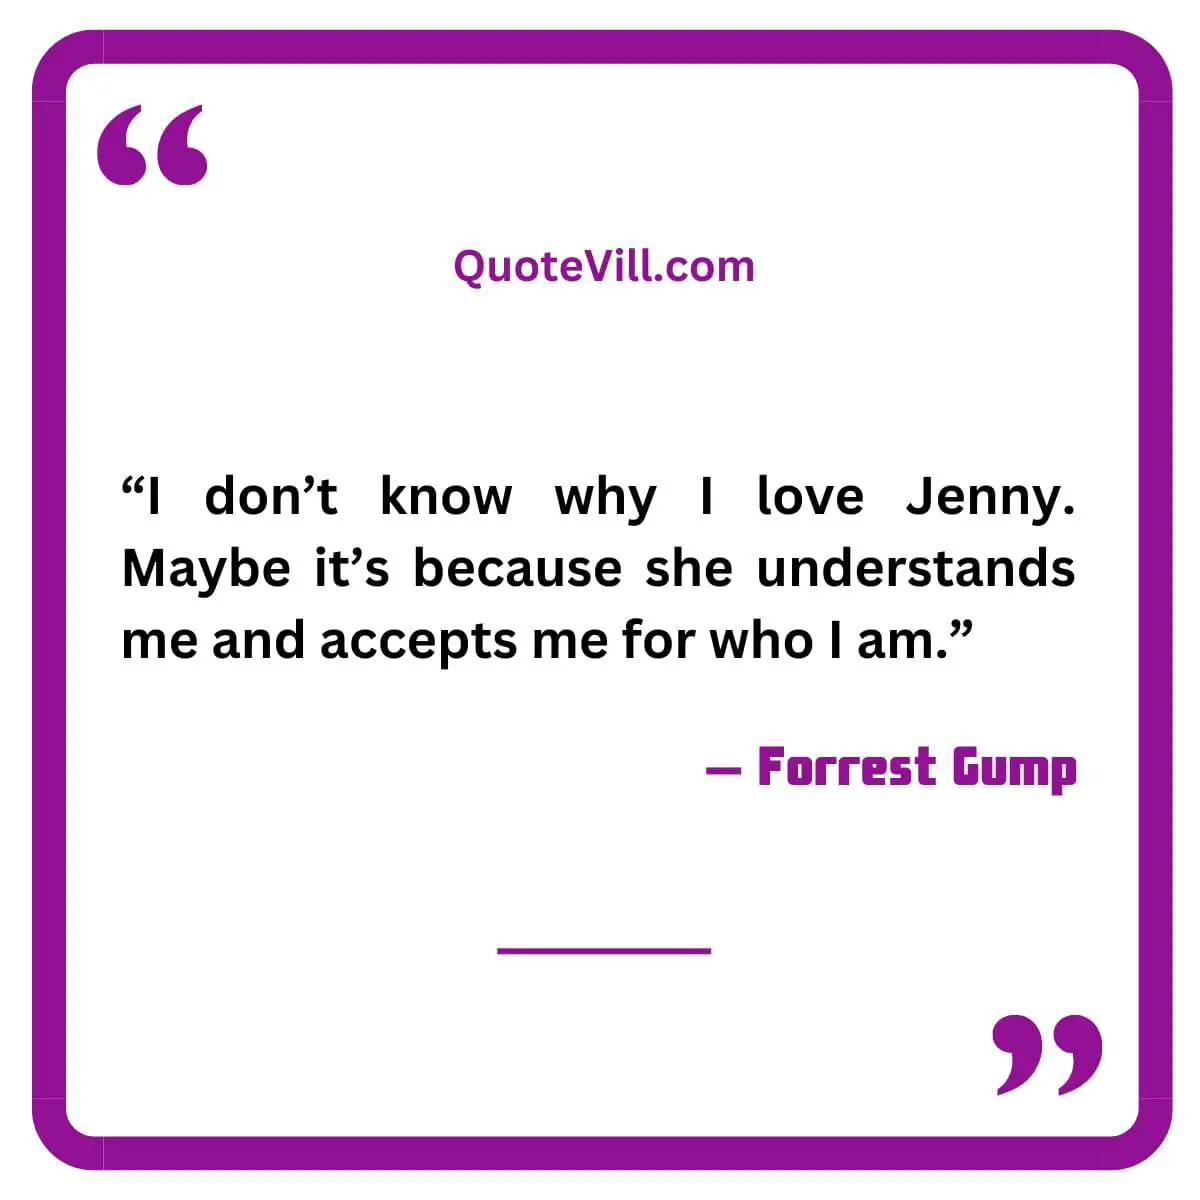 Forrest Gump Quotes On Love